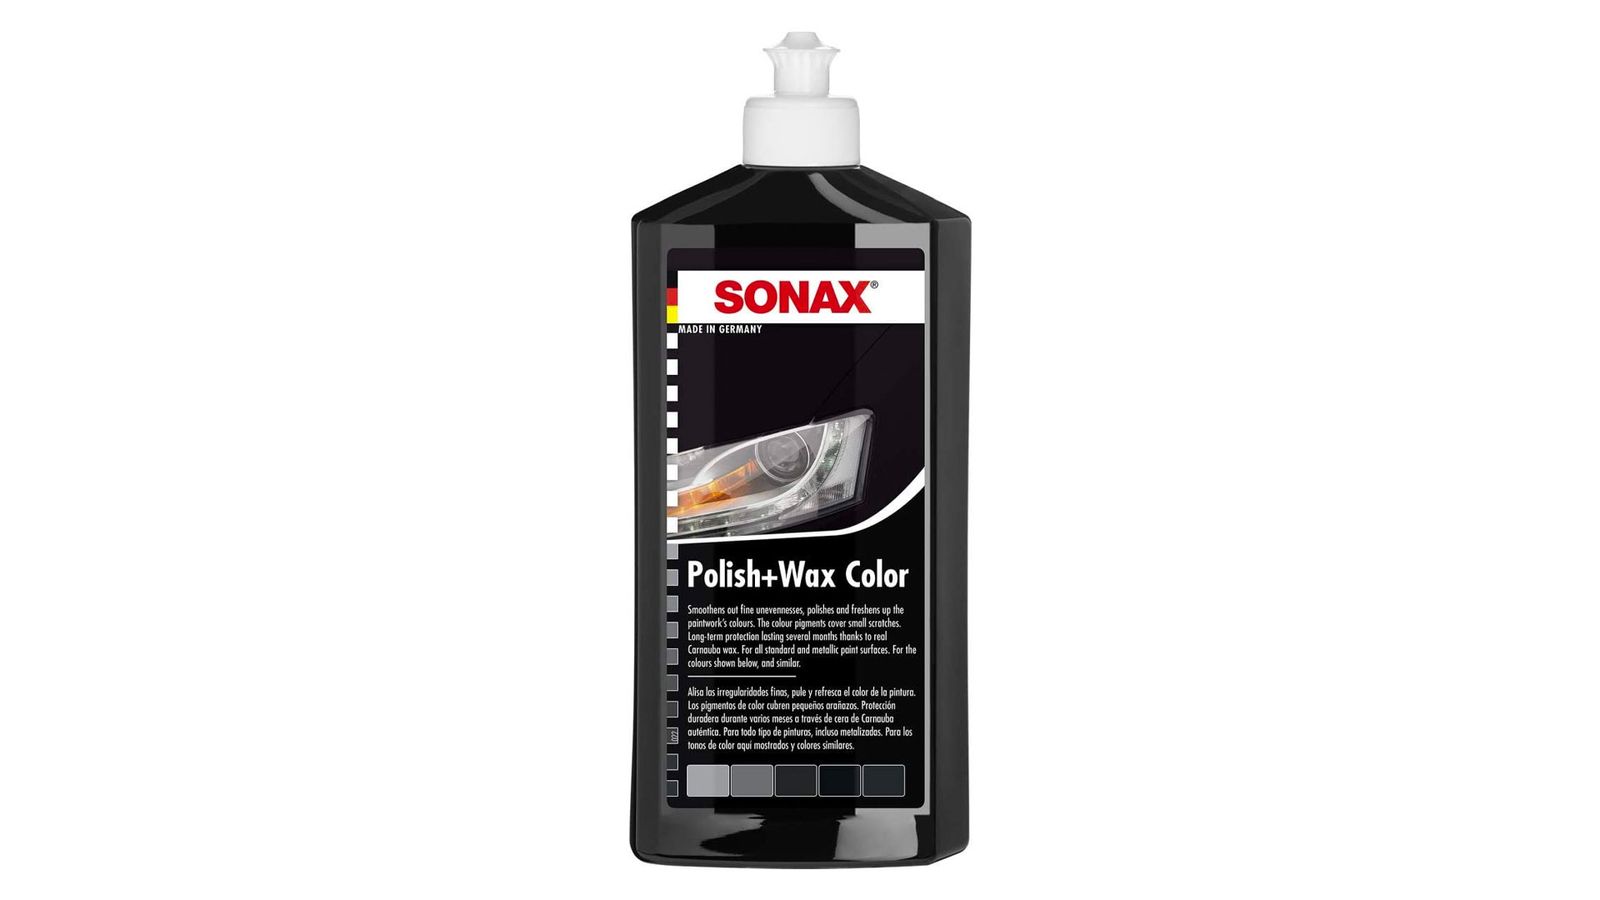 SONAX Polish Wax Colour Nano Pro product image of a black bottle with a white cap.